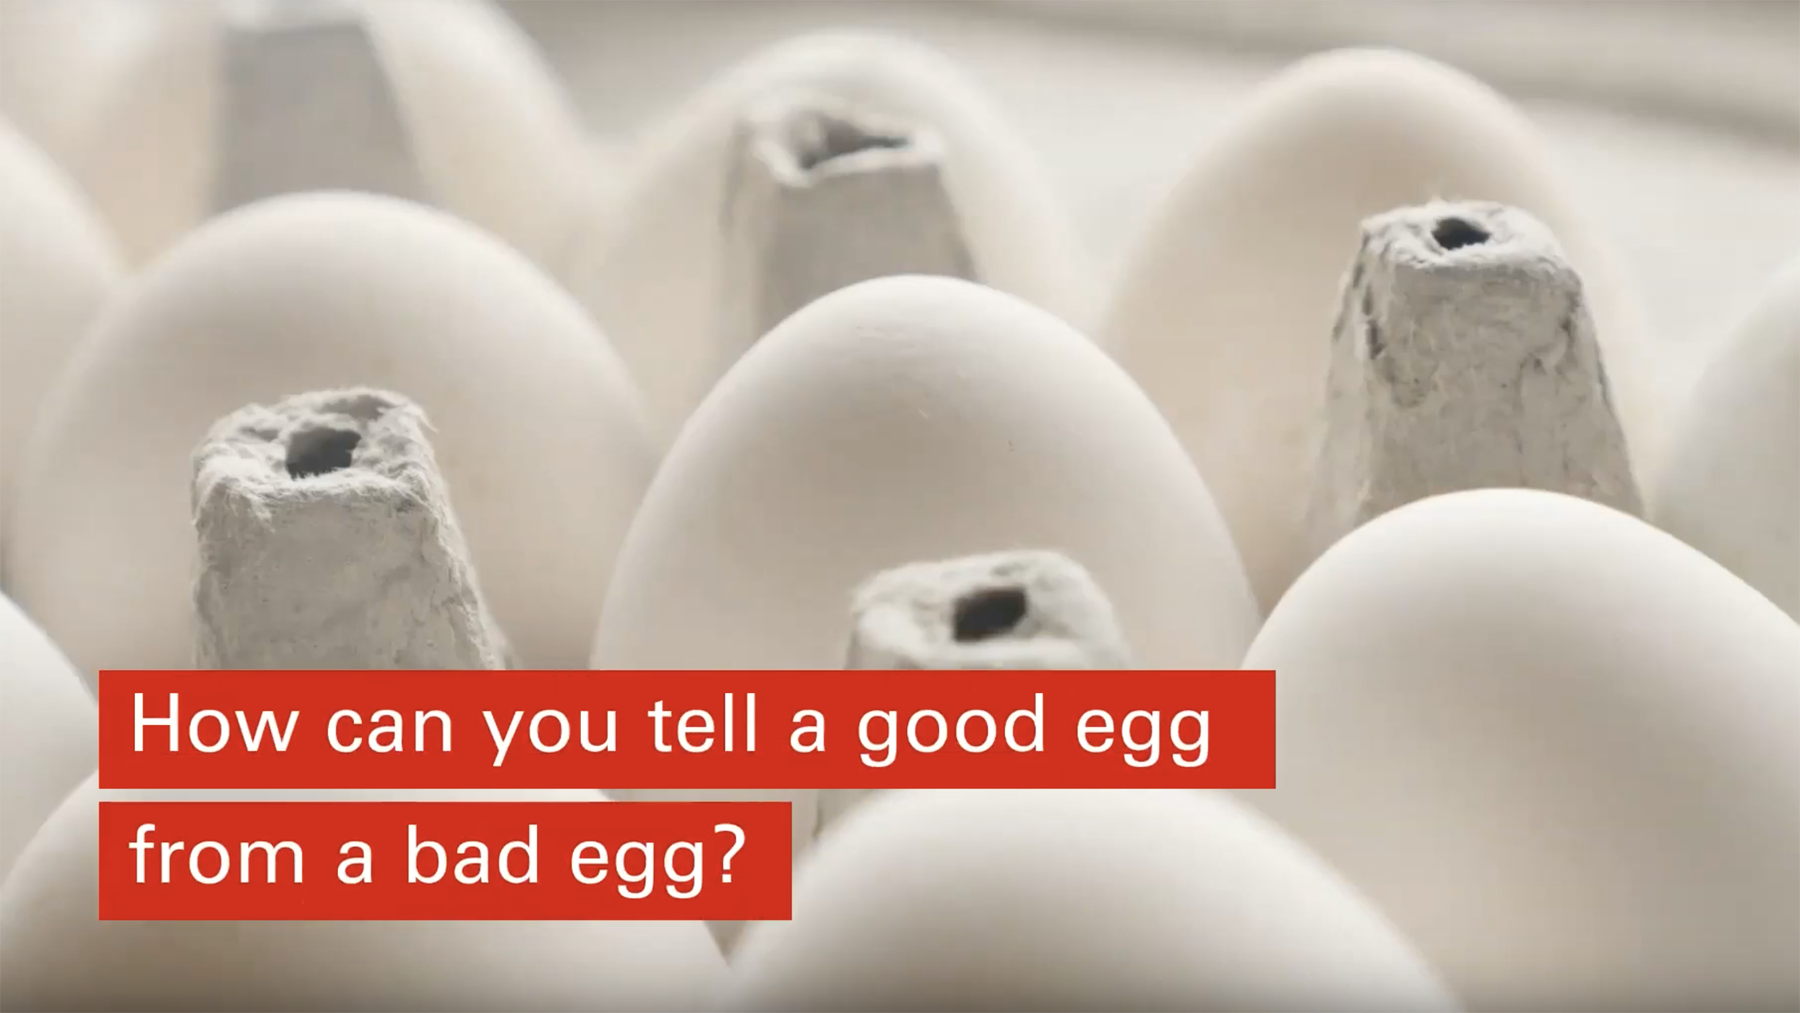 How to tell a good egg from a bad egg